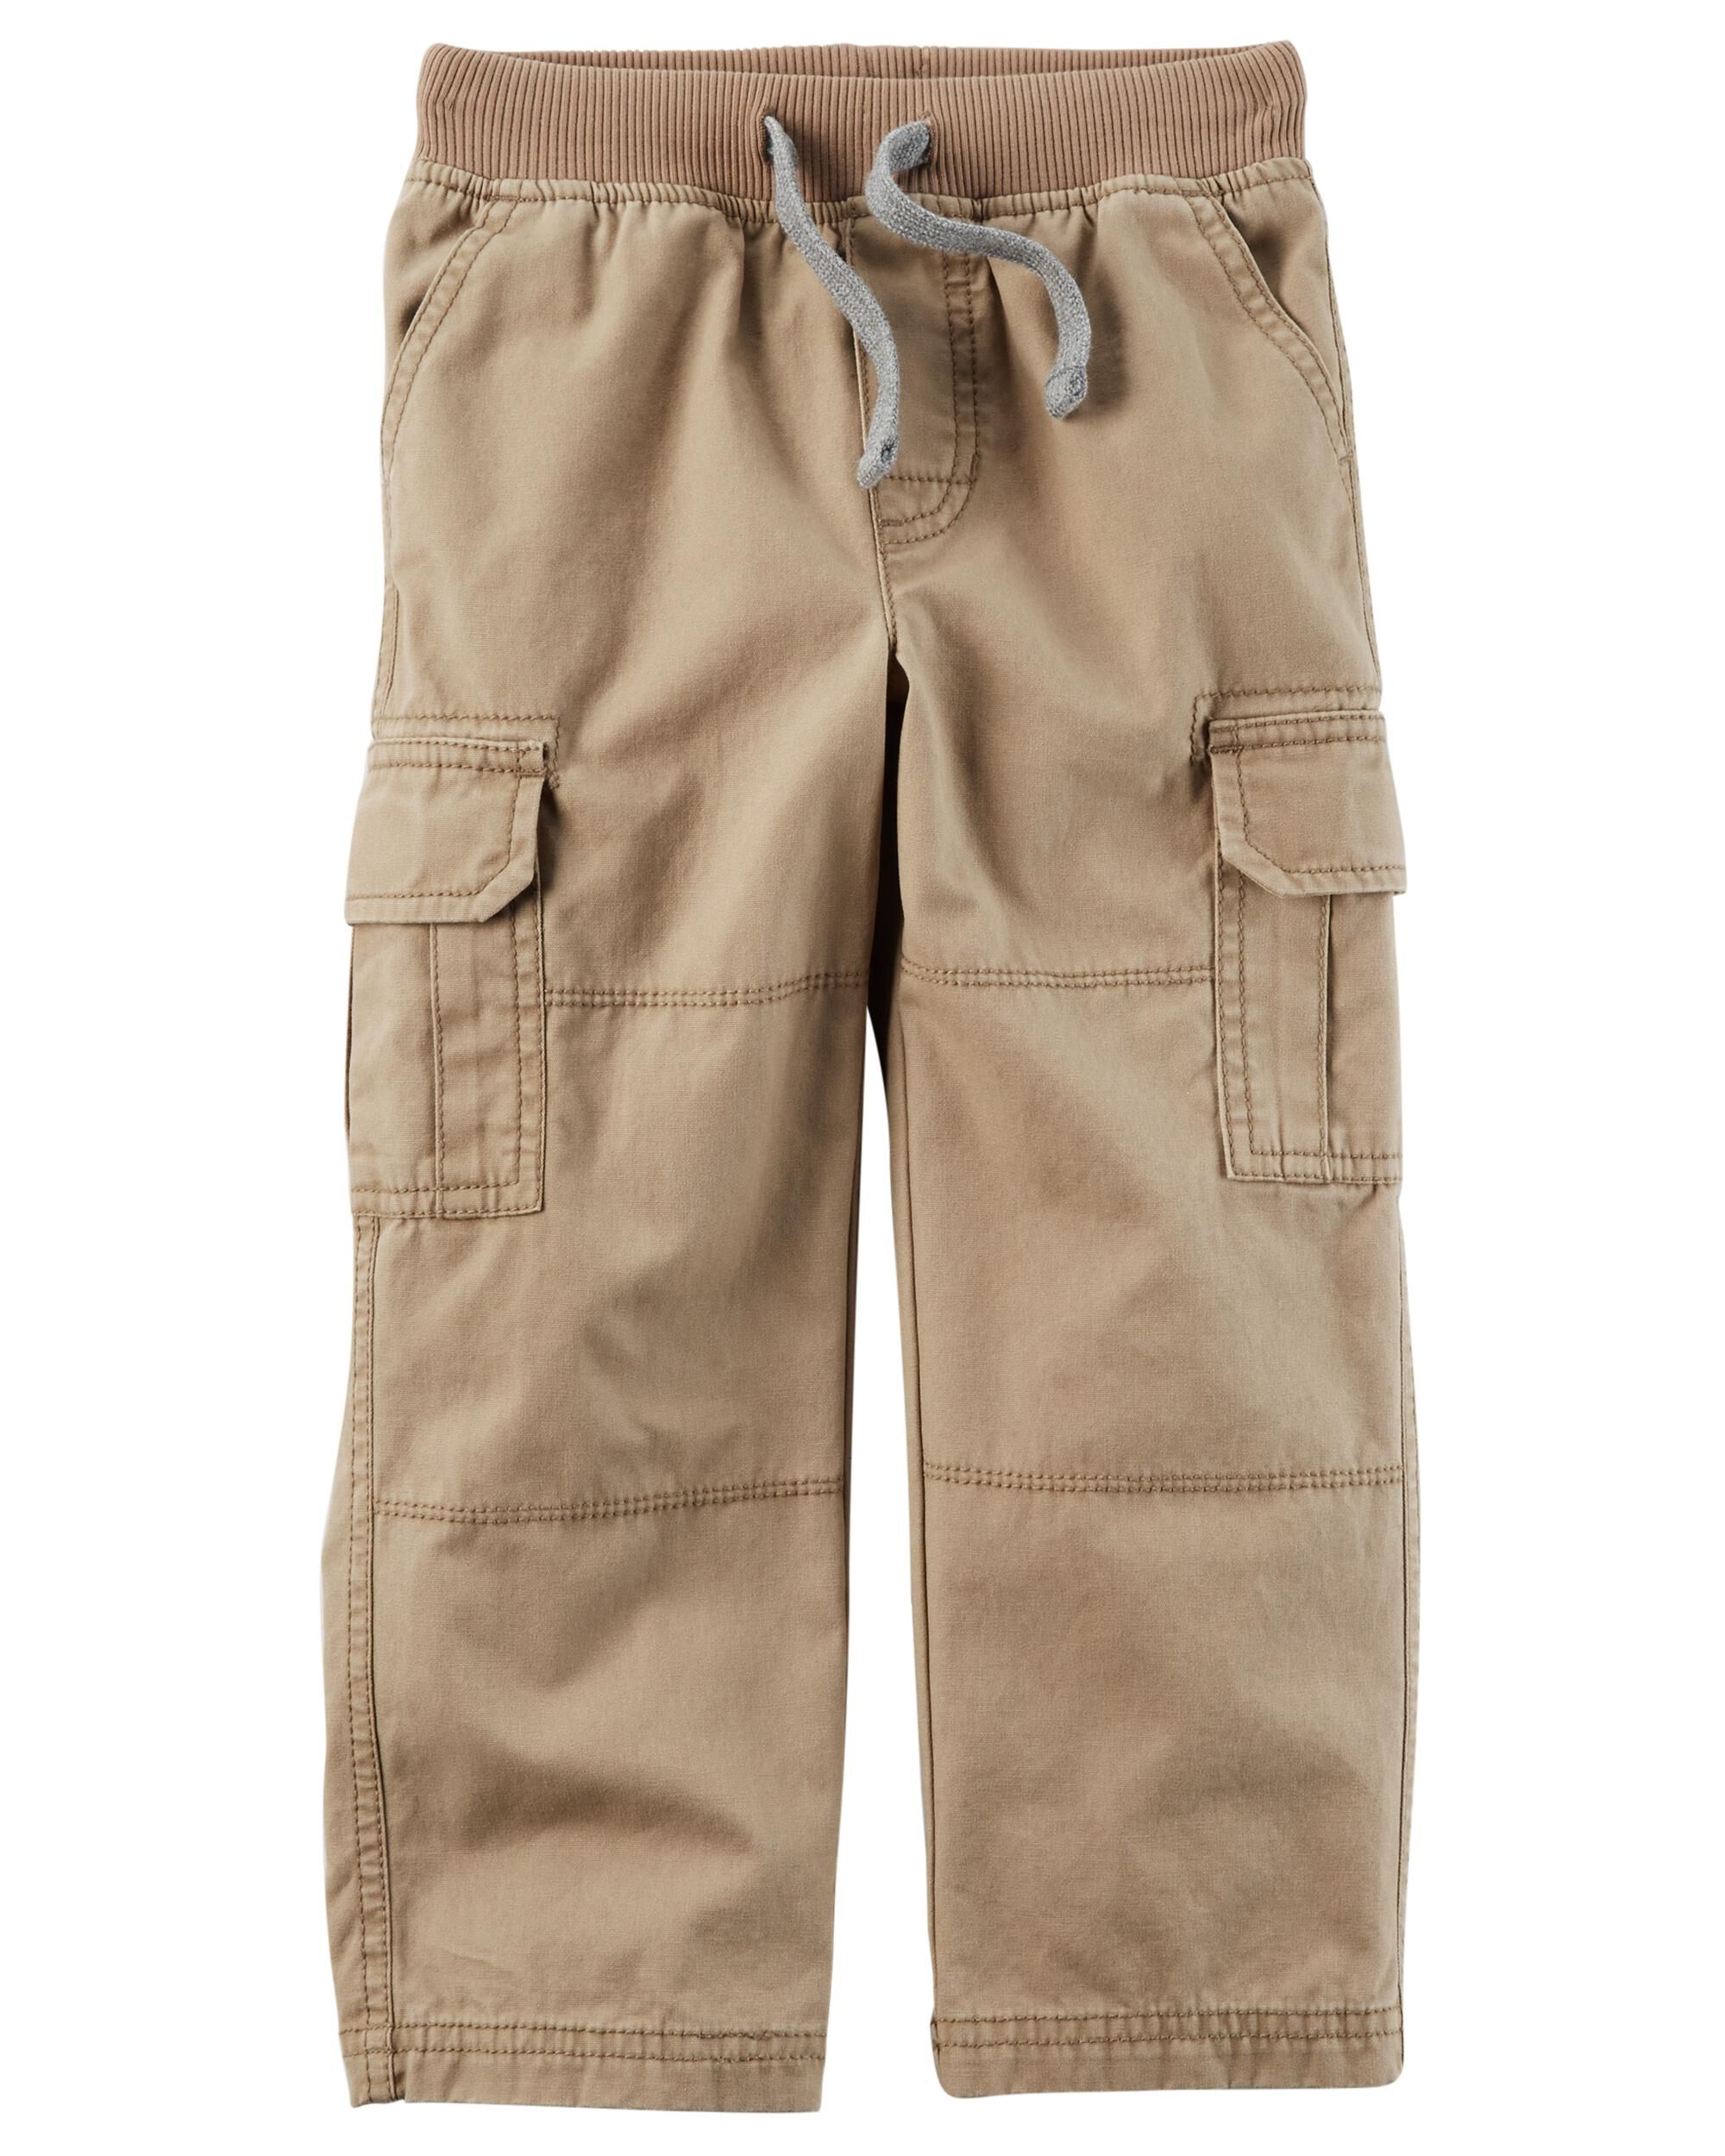 reinforced knee pants for toddlers